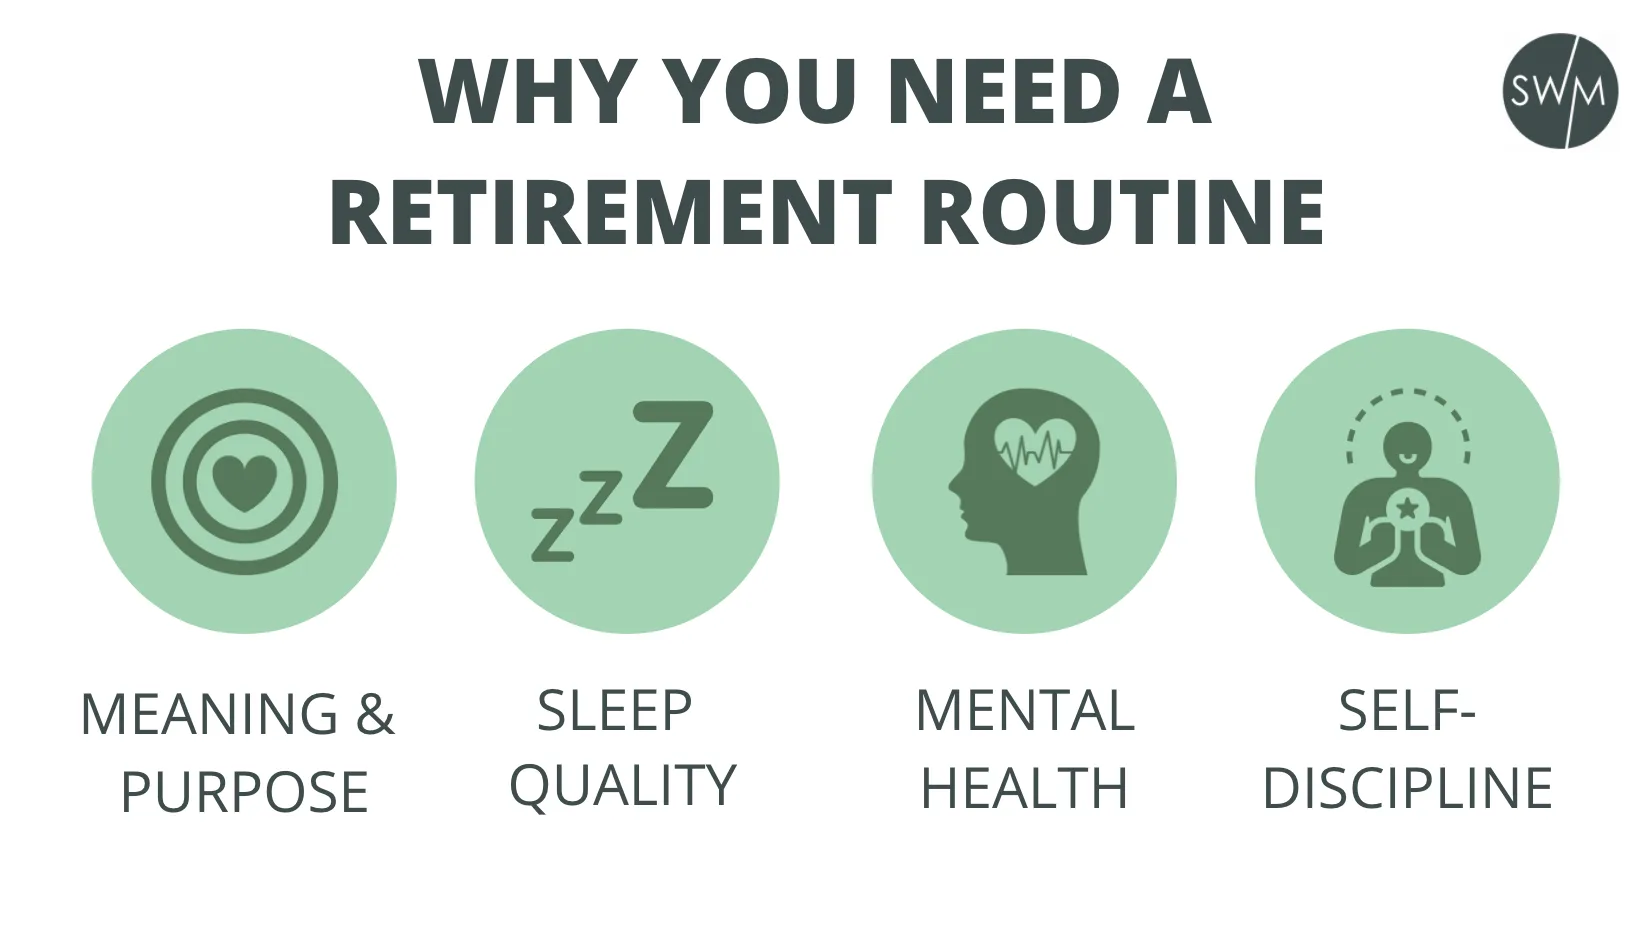 why you need a retirement routine: for more meaning and purpose, for better sleep quality, for improved mental health and less stress, and more self-discipline